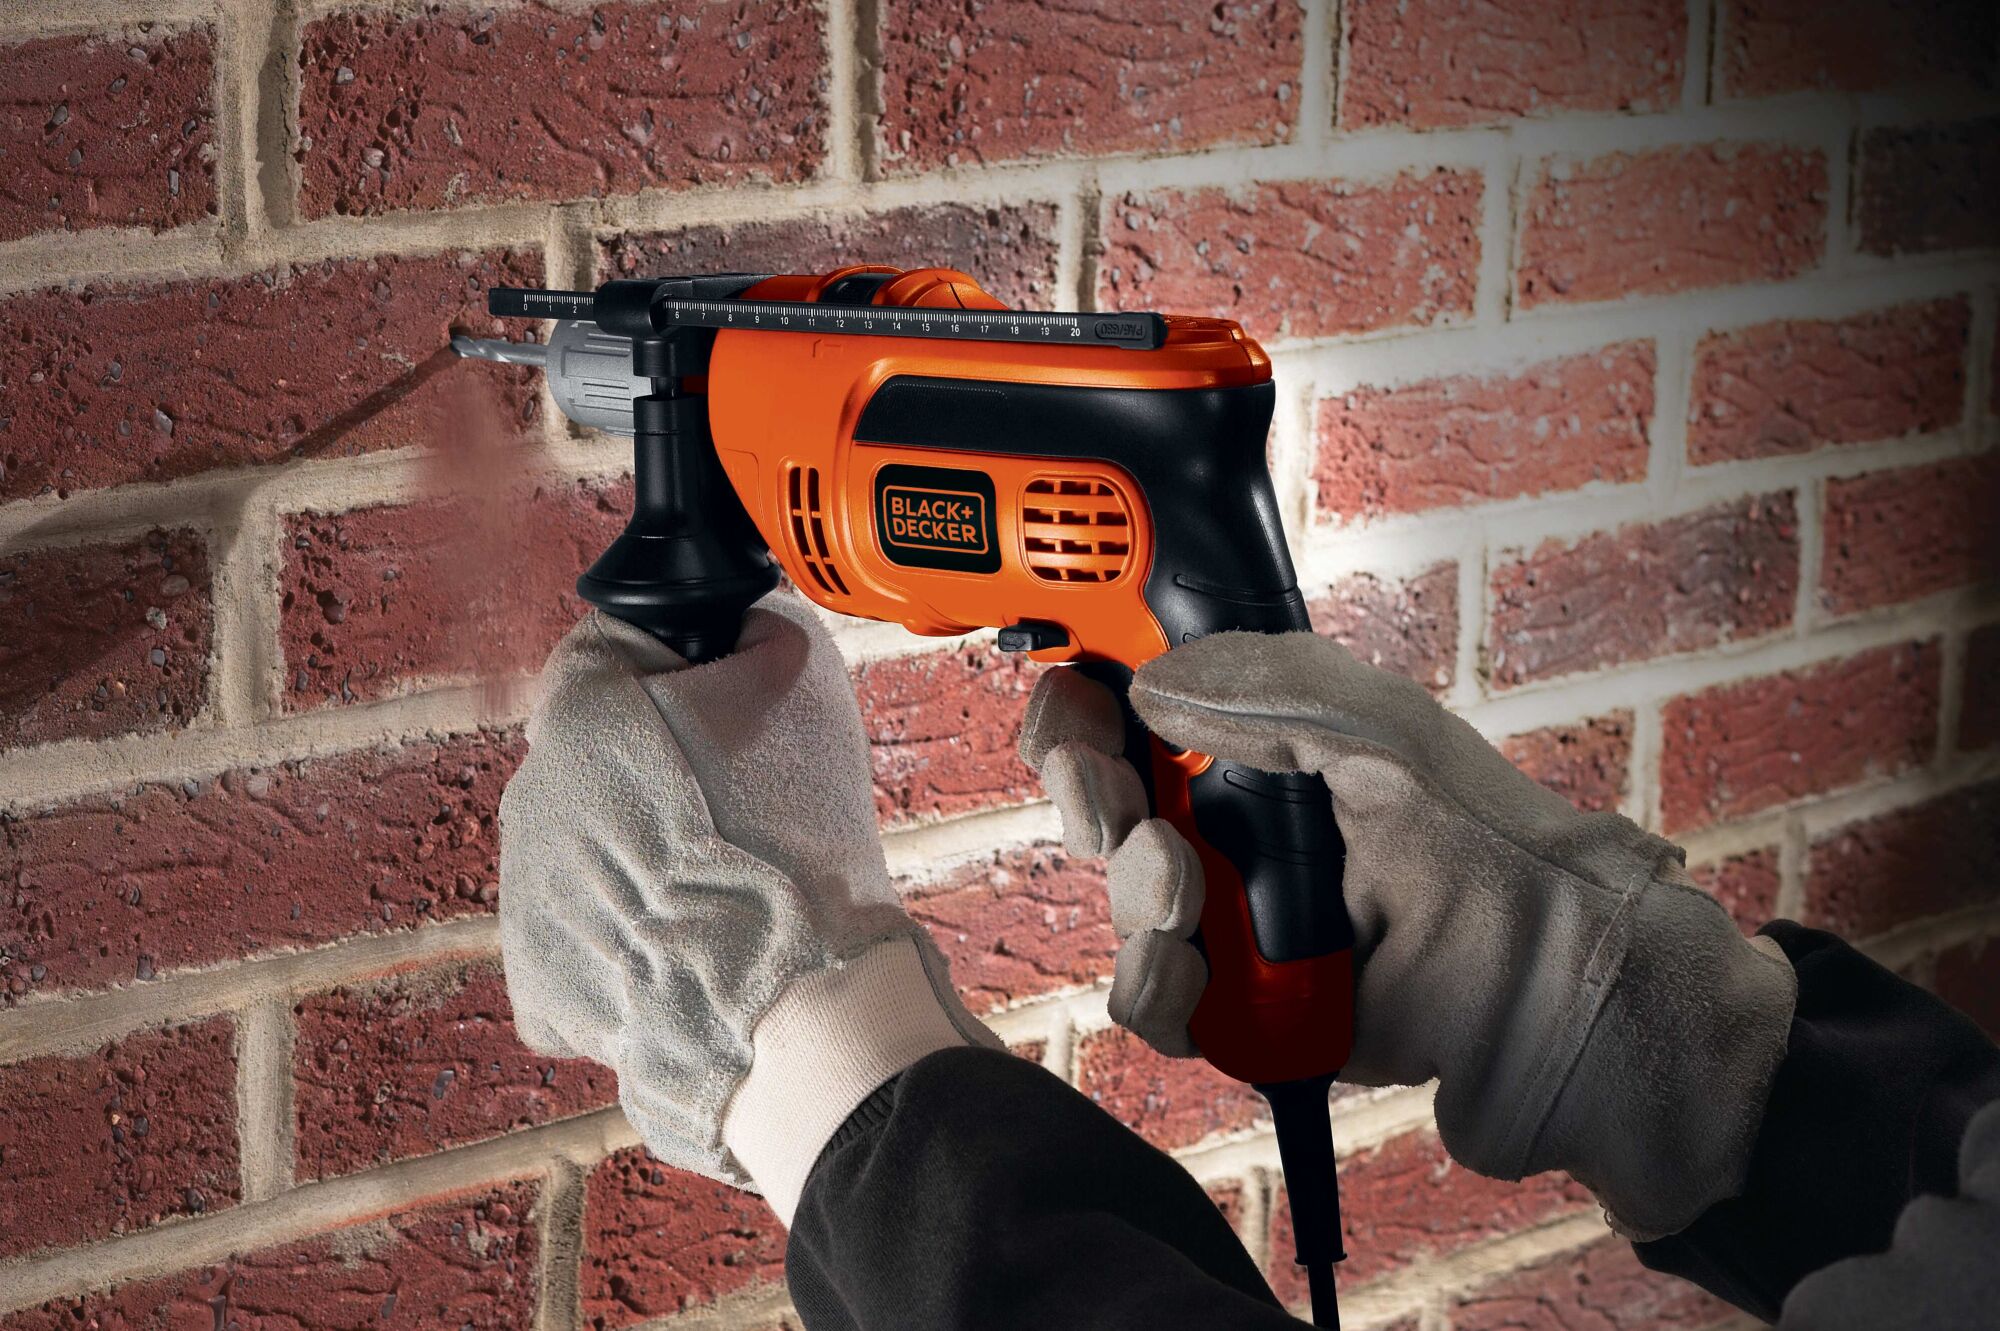 6 Amp half inch Hammer Drill being used for drilling hole in brick wall.